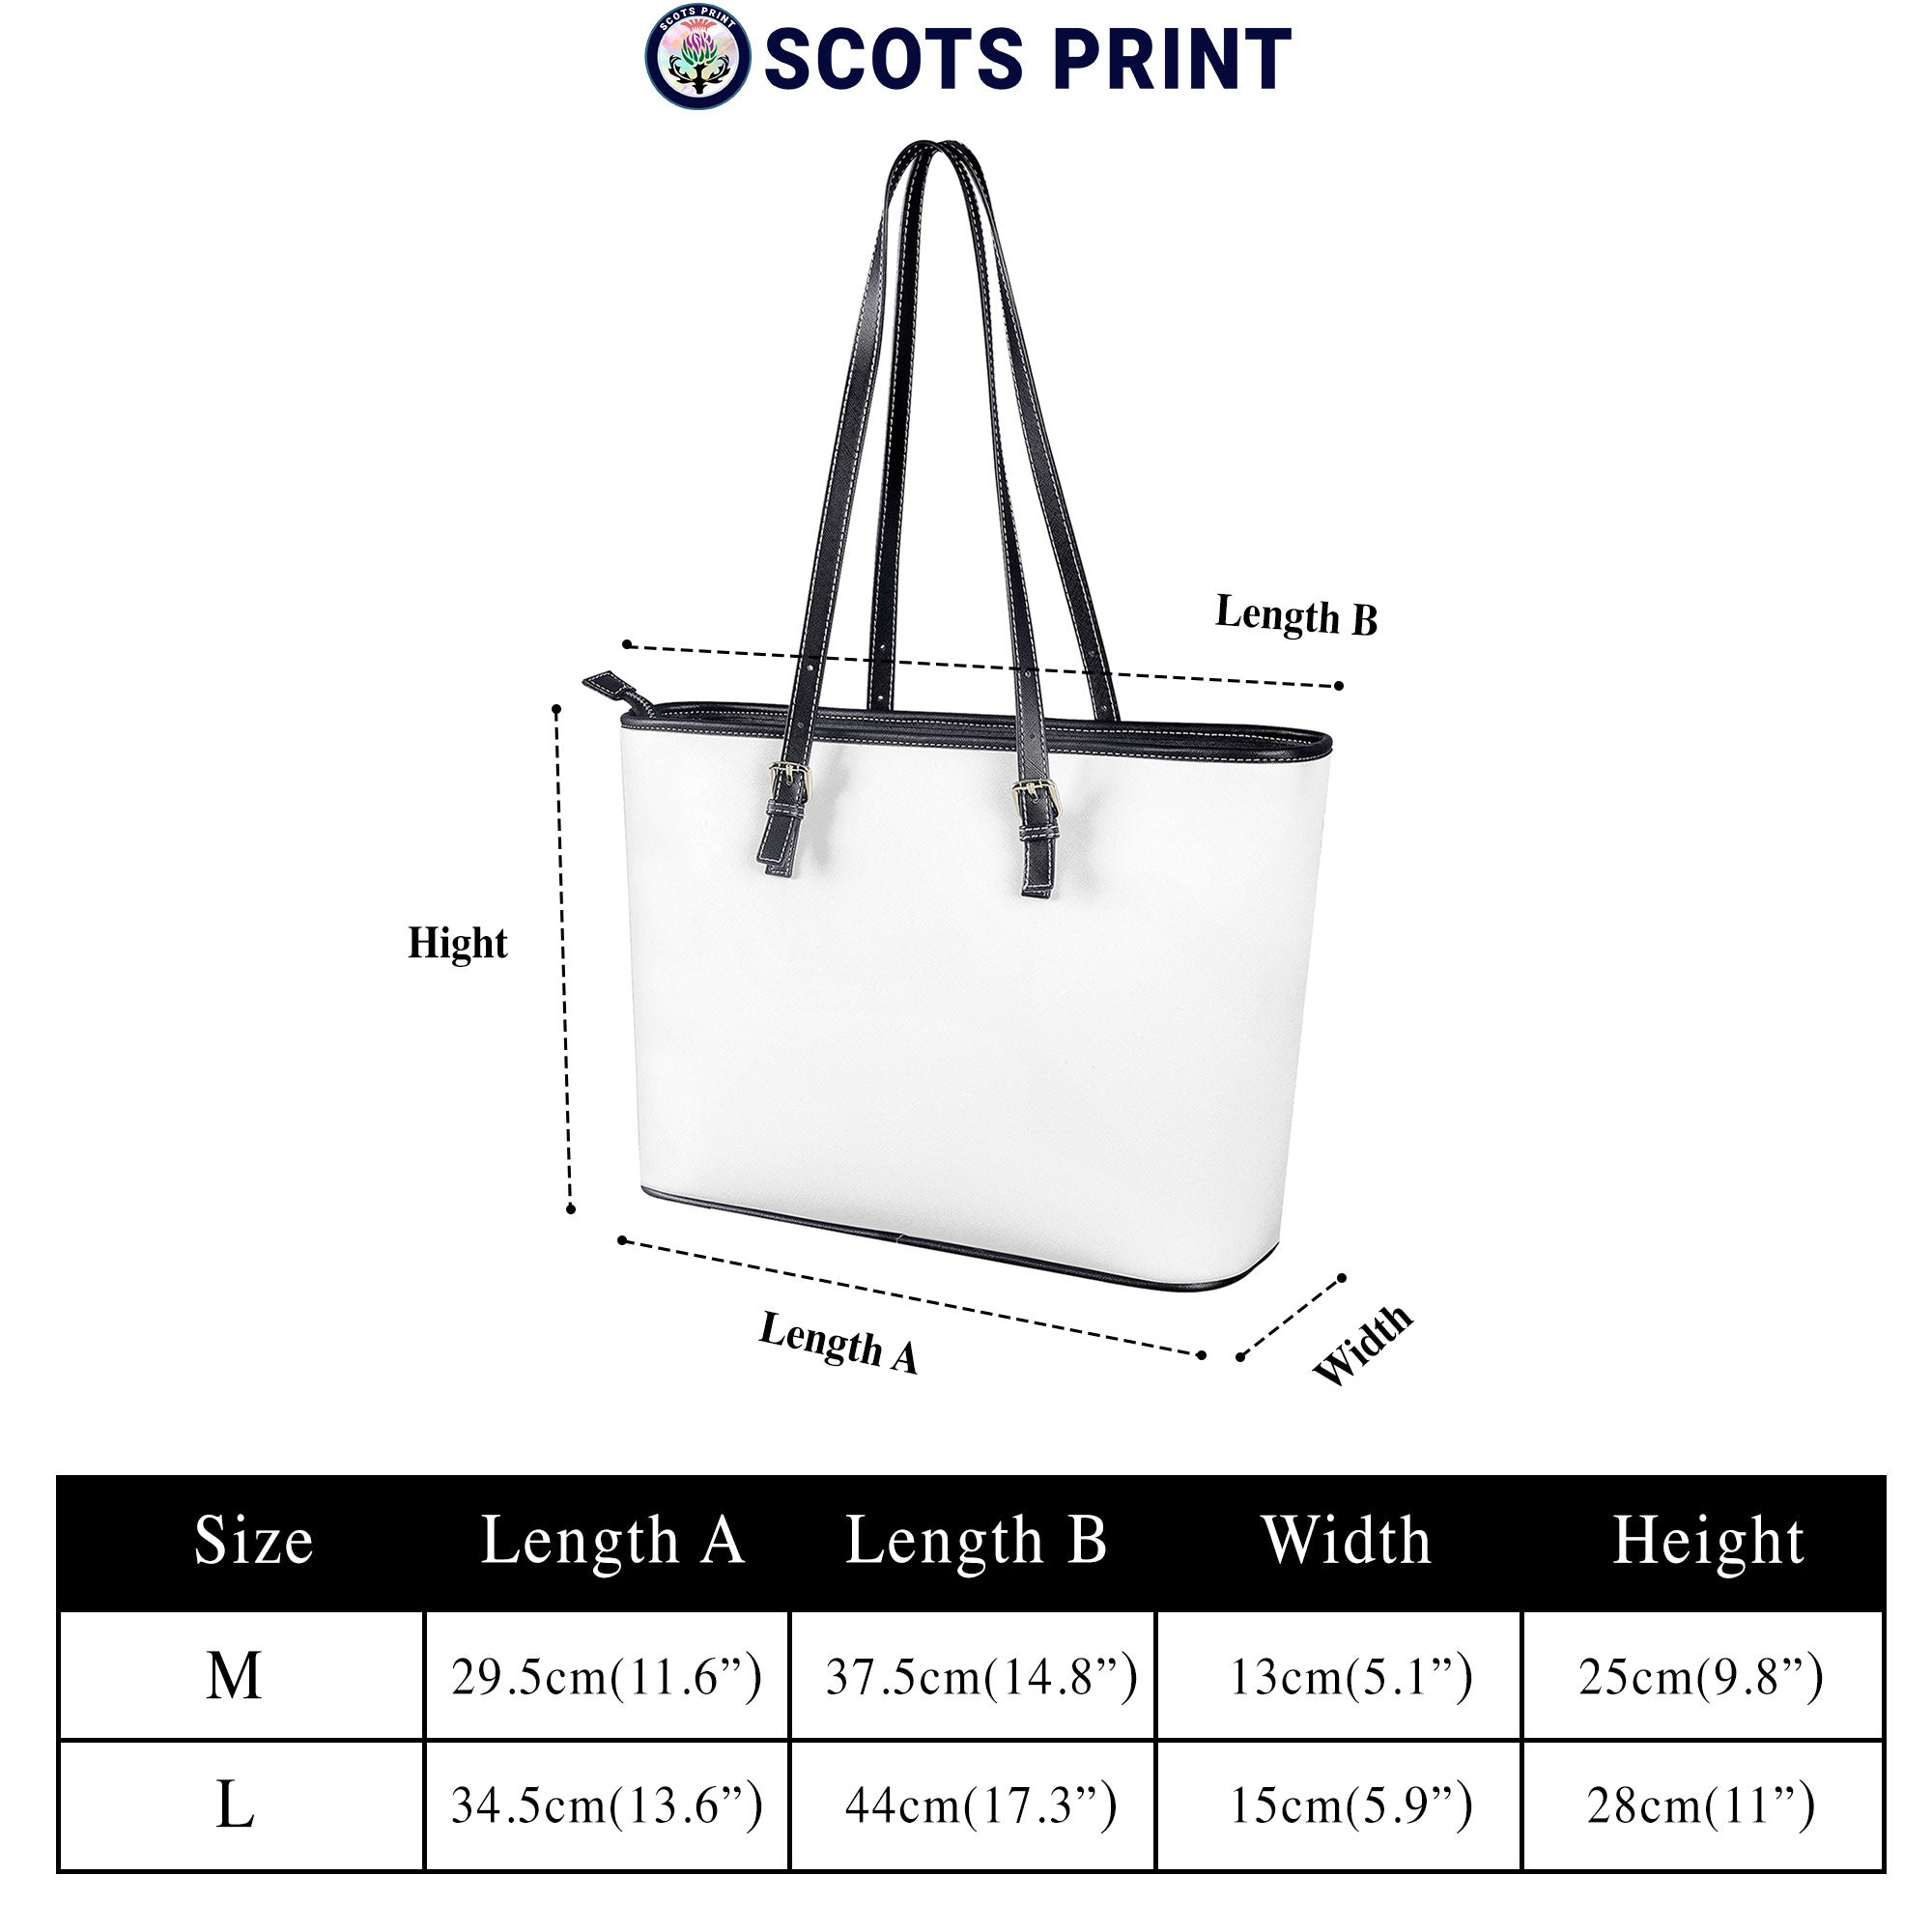 Smith Ancient Tartan Crest Leather Tote Bag